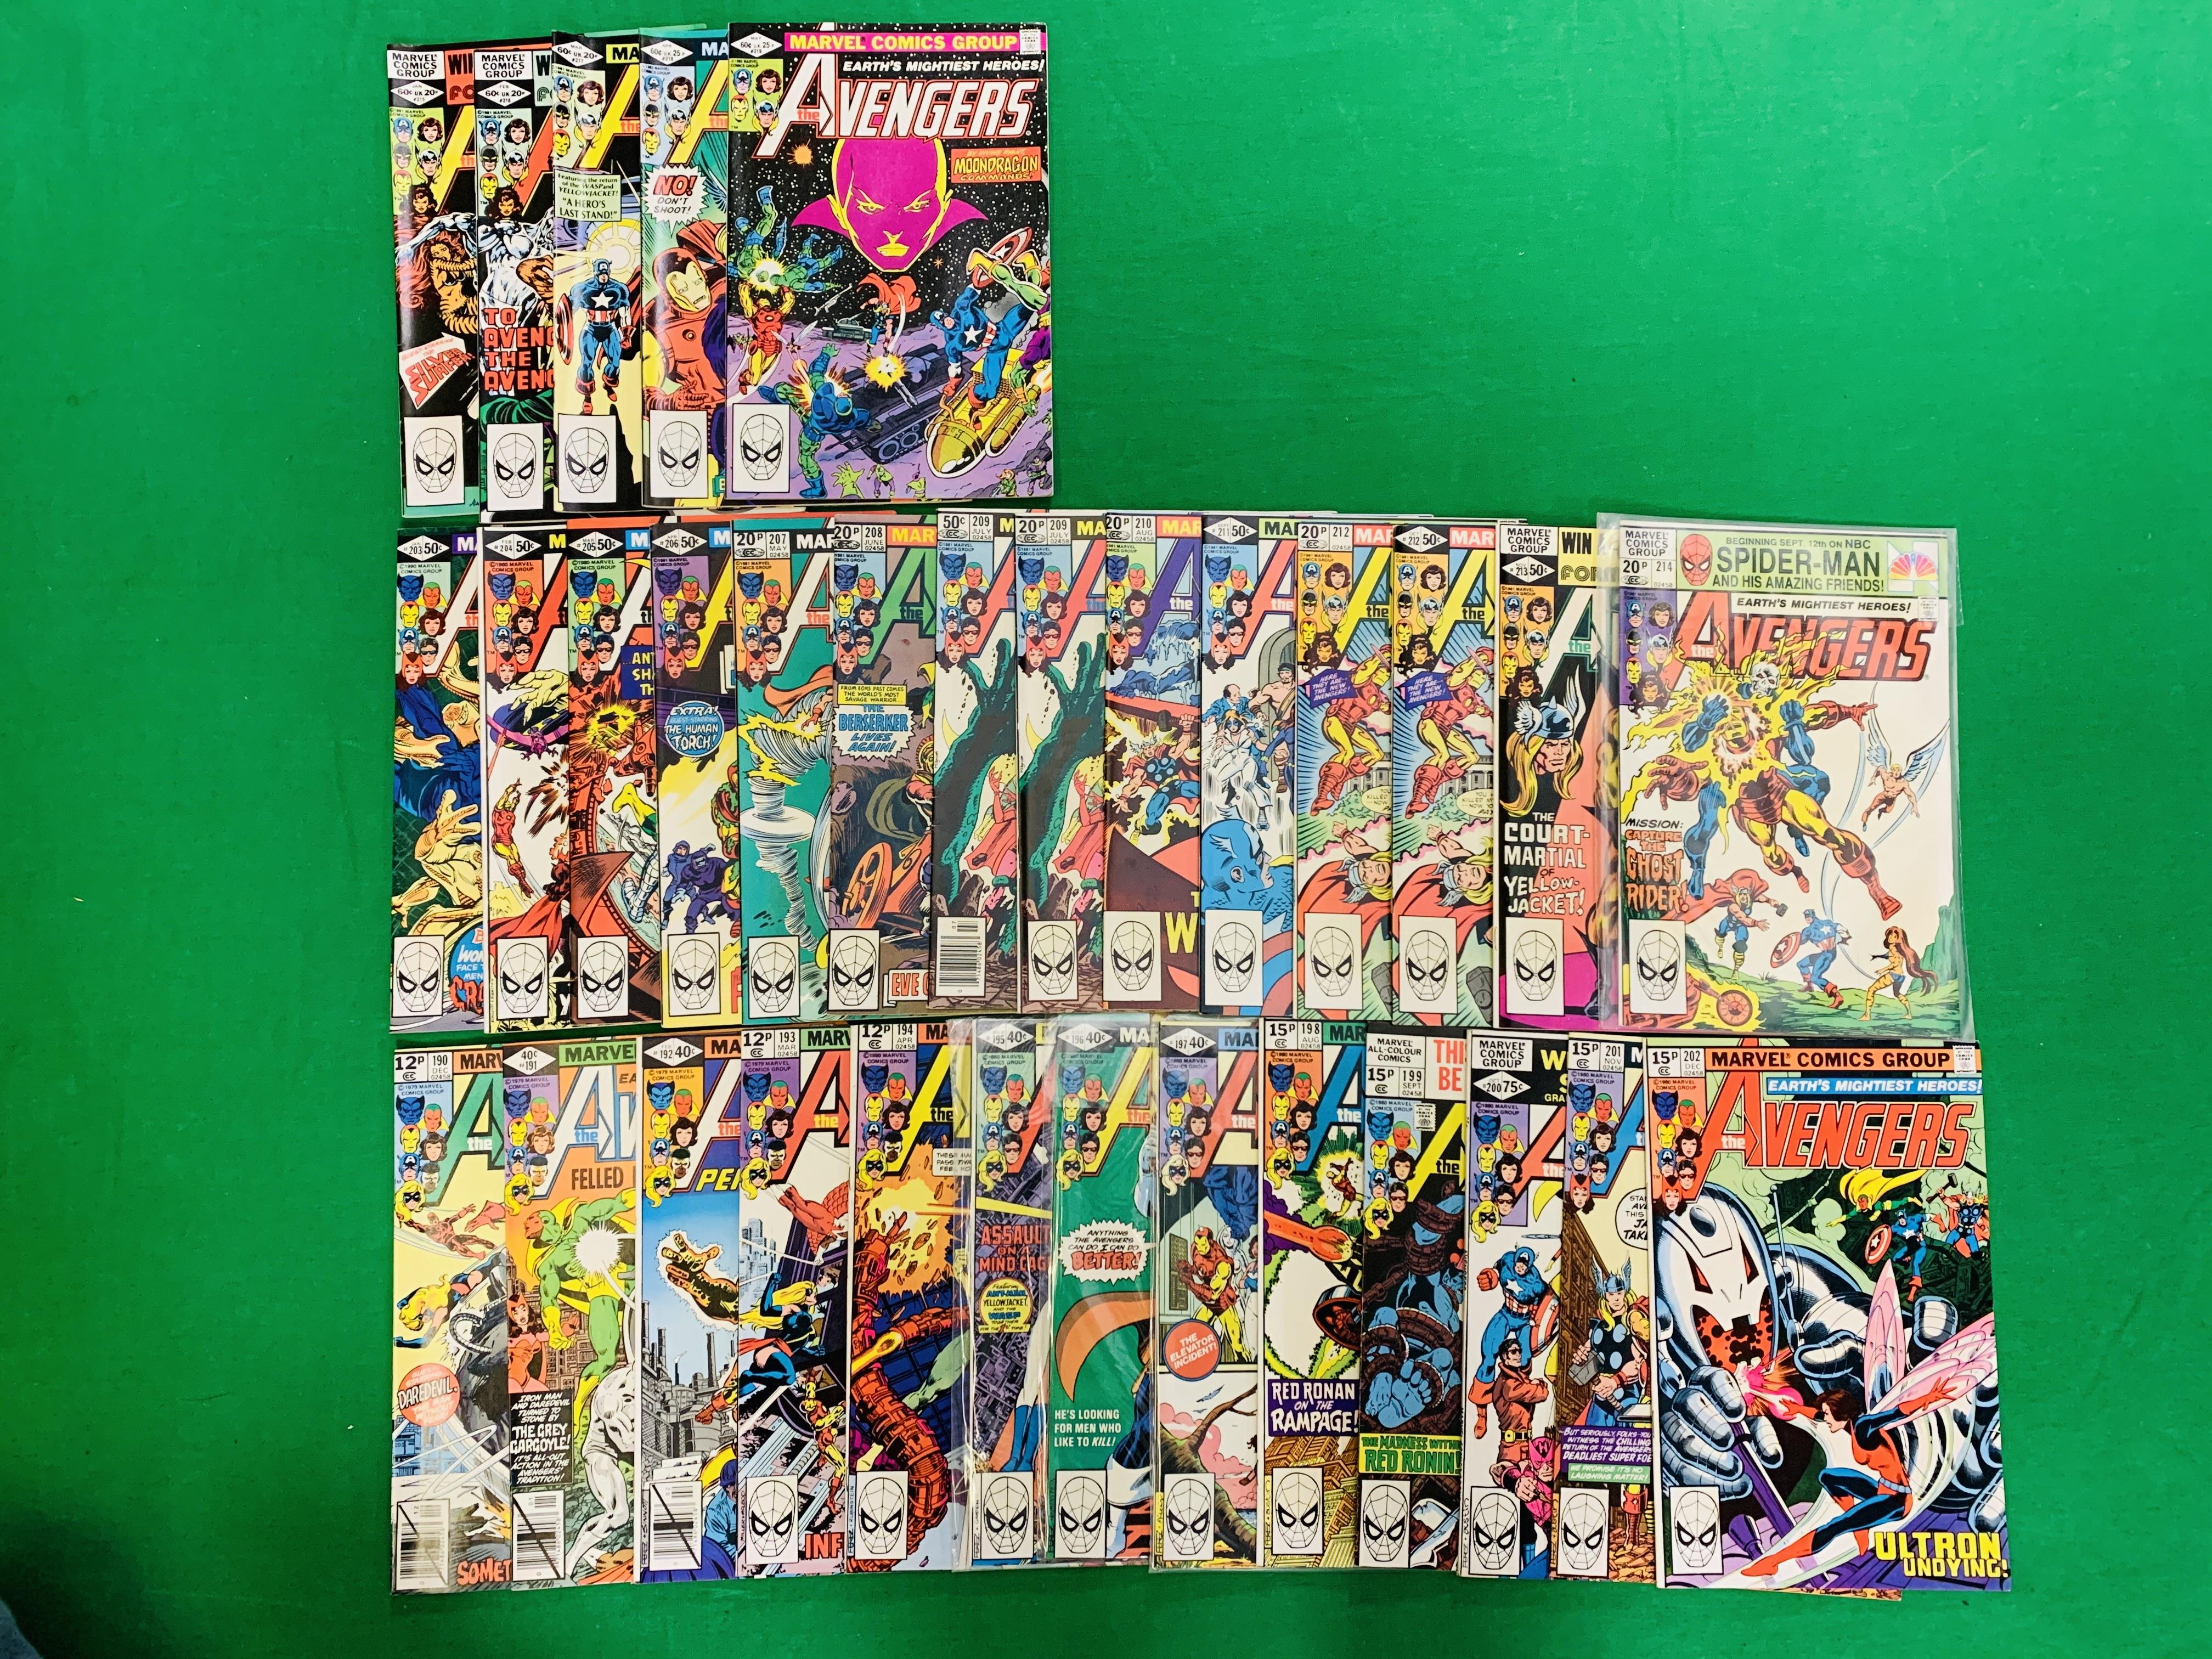 MARVEL COMICS THE AVENGERS NO. 101 - 299, MISSING ISSUES 103 AND 110. - Image 104 of 130